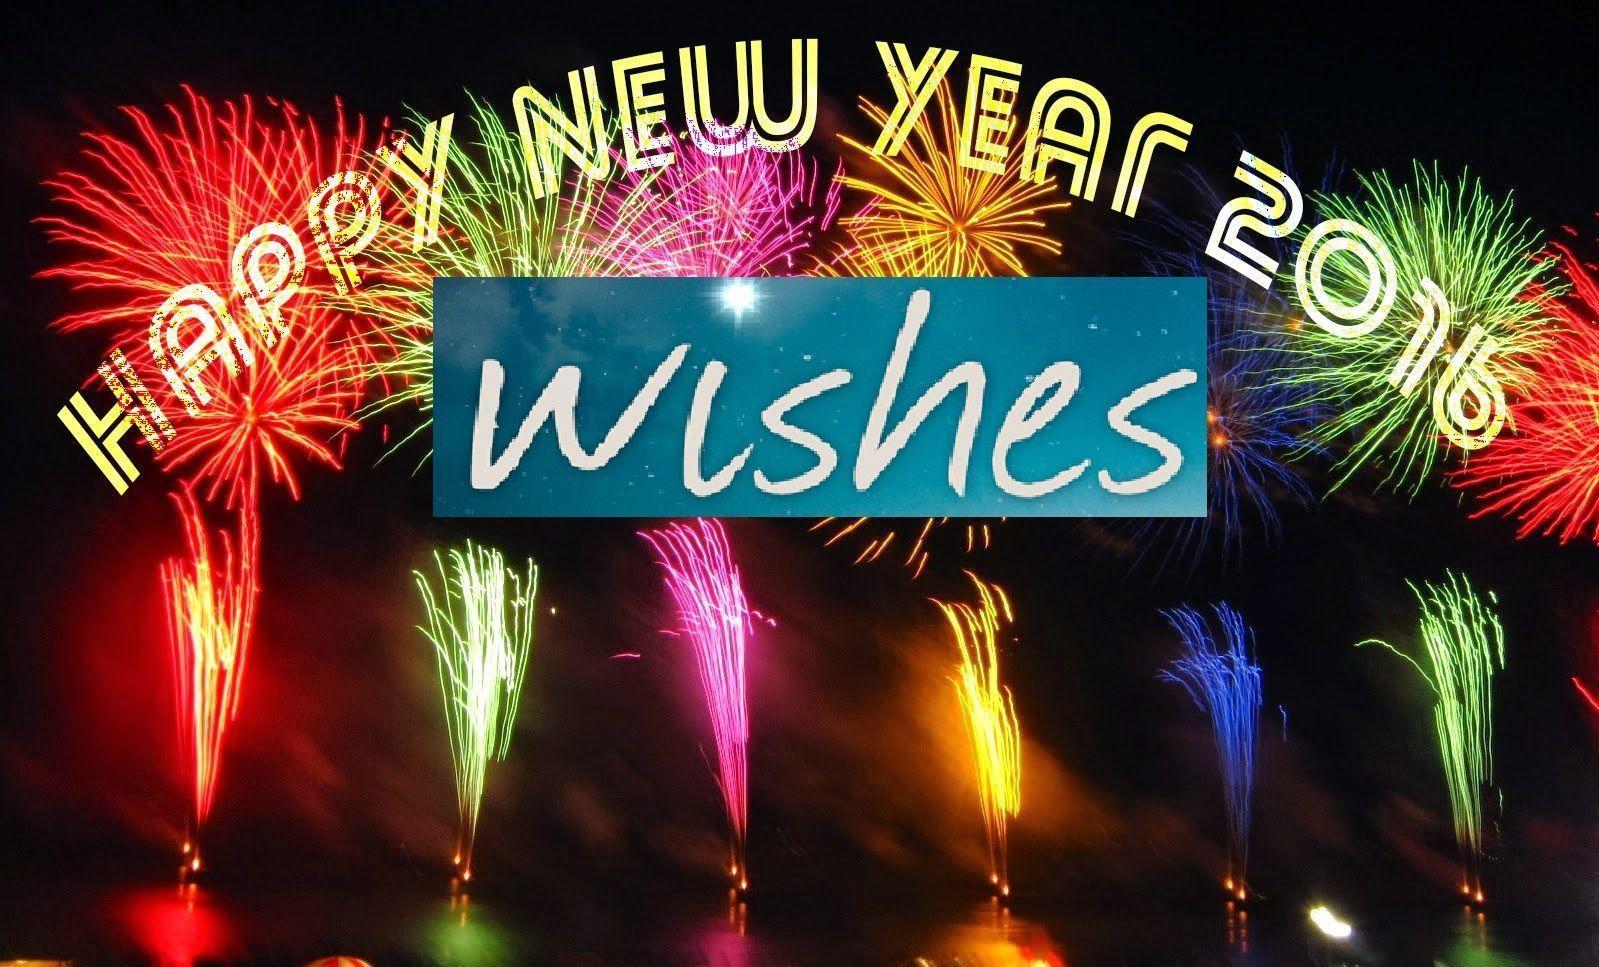 Happy New Year 2016 Image. New Year Wishes 2016. New Year